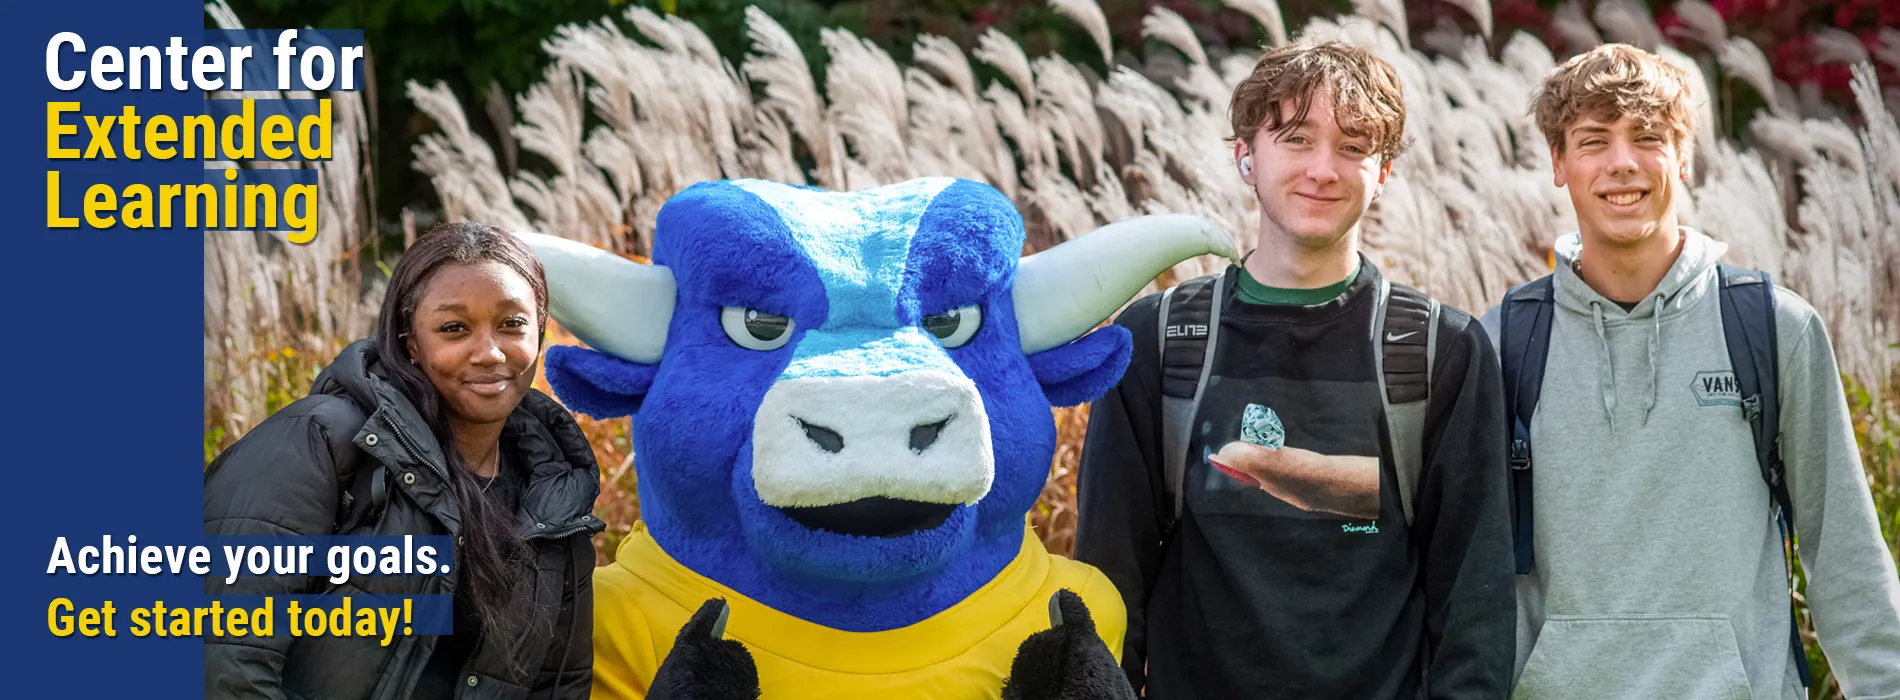 Center for Extended Learning, achieve your goals, get started today! image of the blue ox with students.